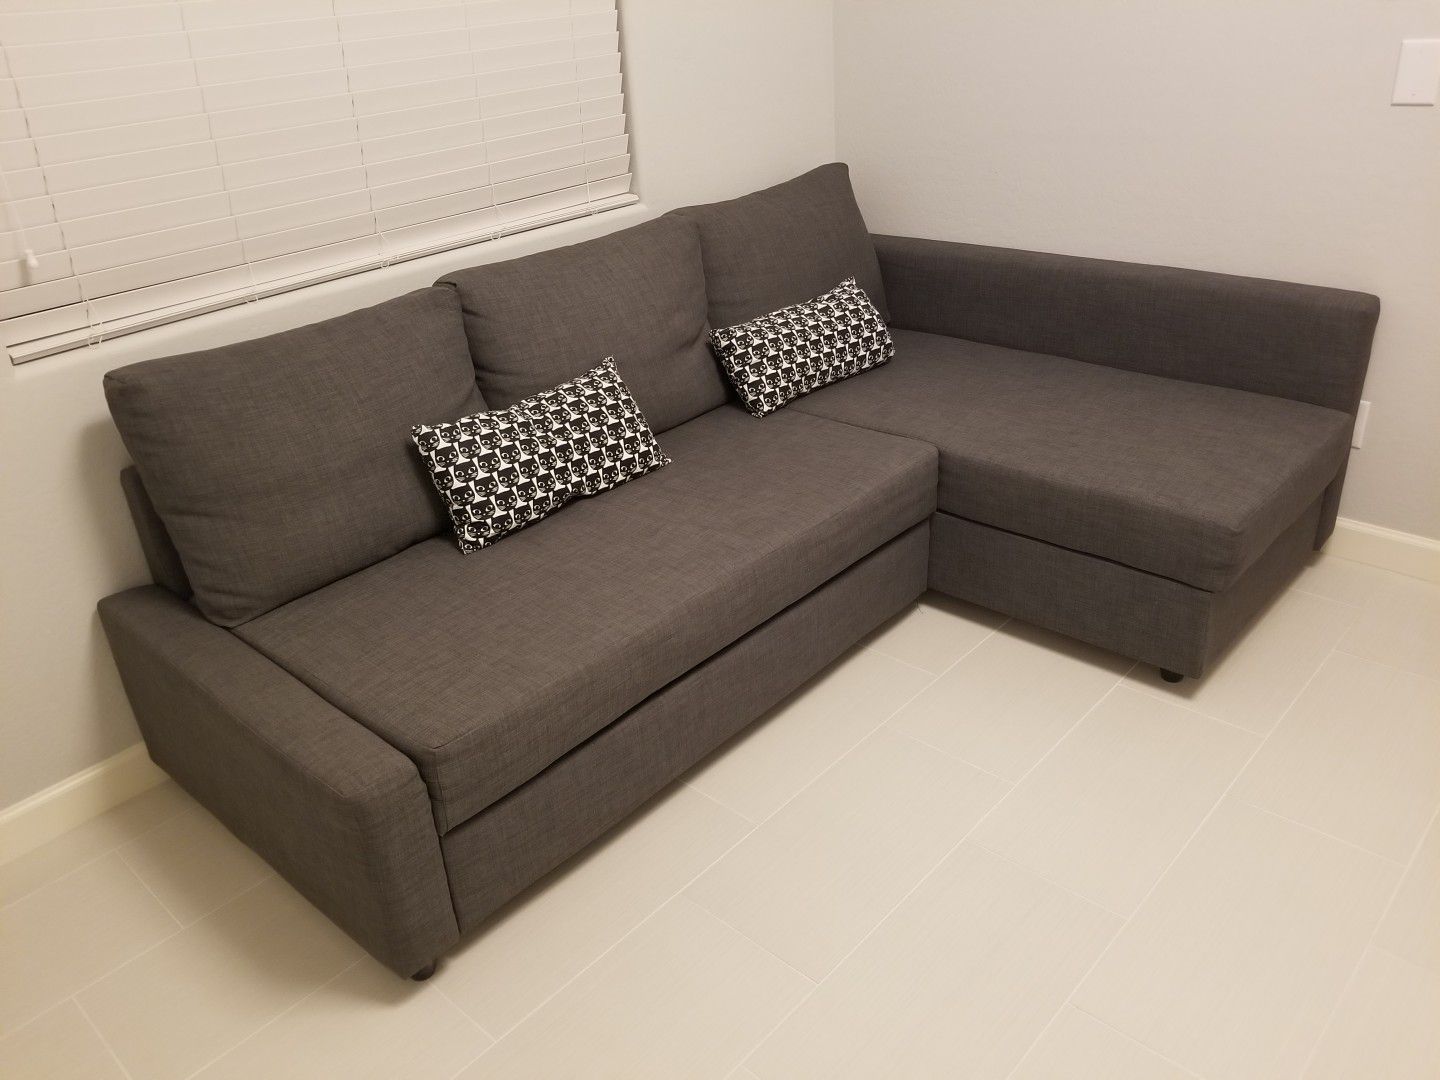 Sleeper sectional sofa couch